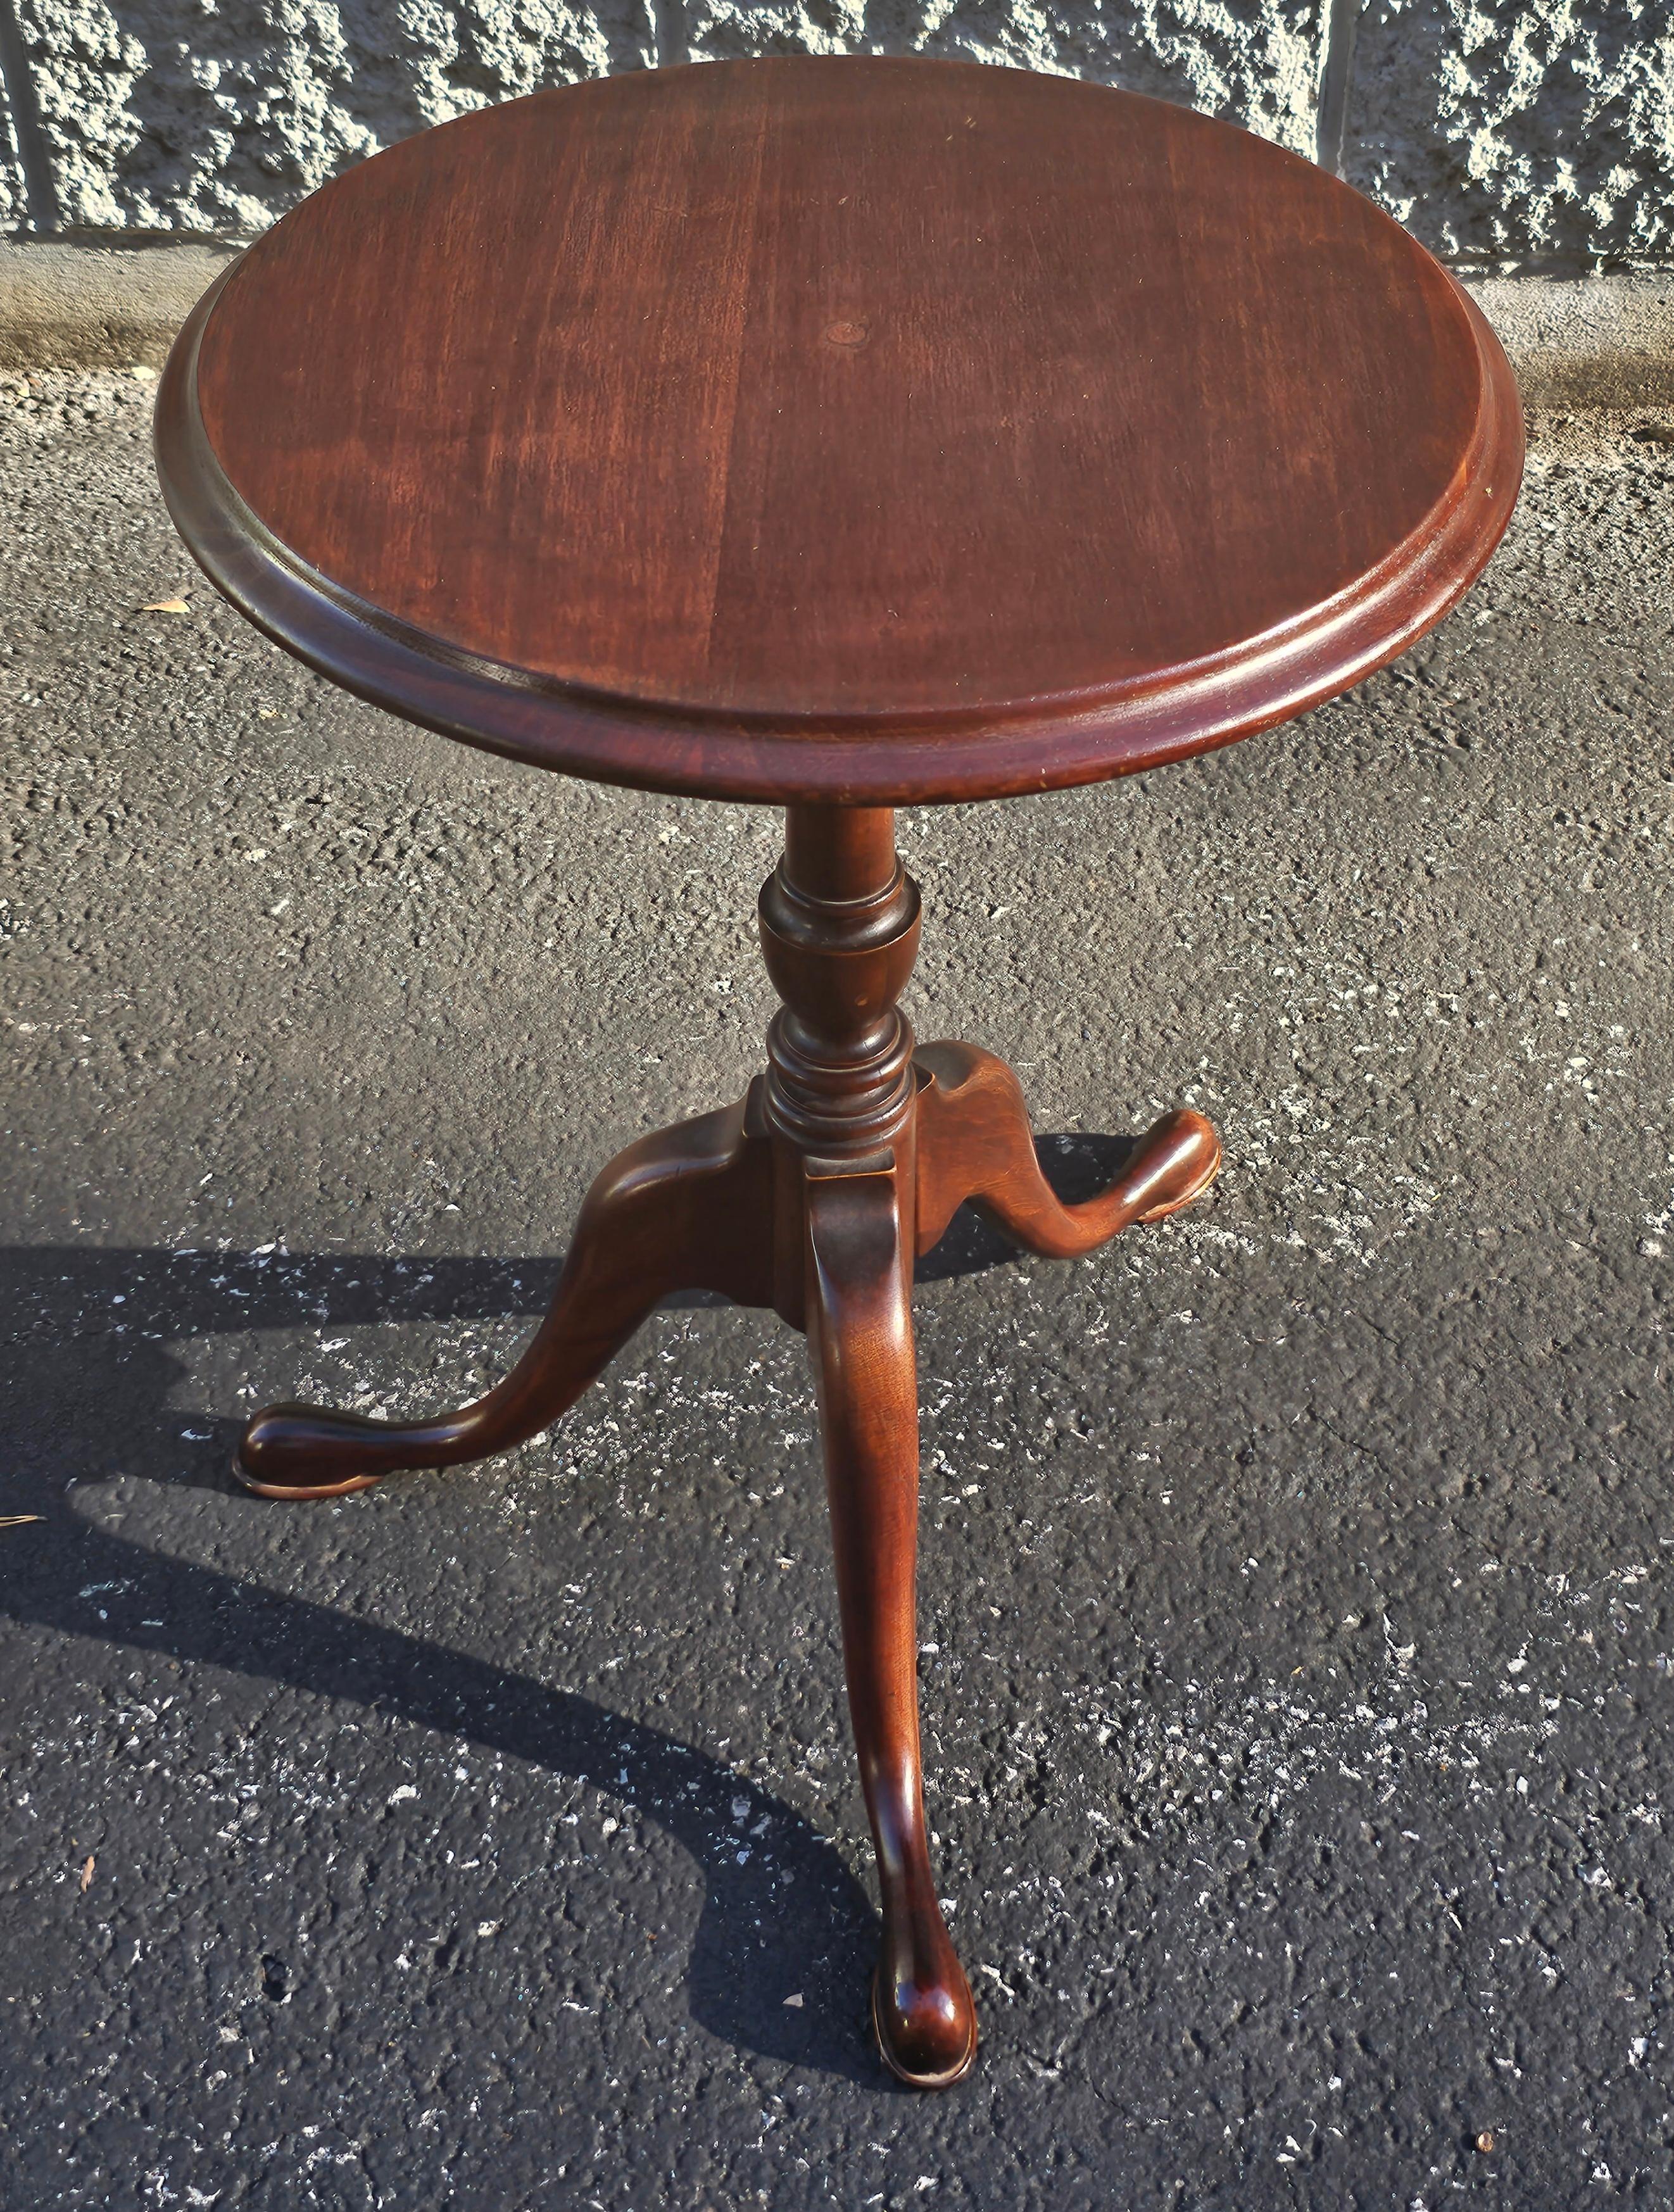 An Early 20th Century Refinished Solid Cherry Pedestal Tripod Candle Stand with Snake Feet. 
Measures 16